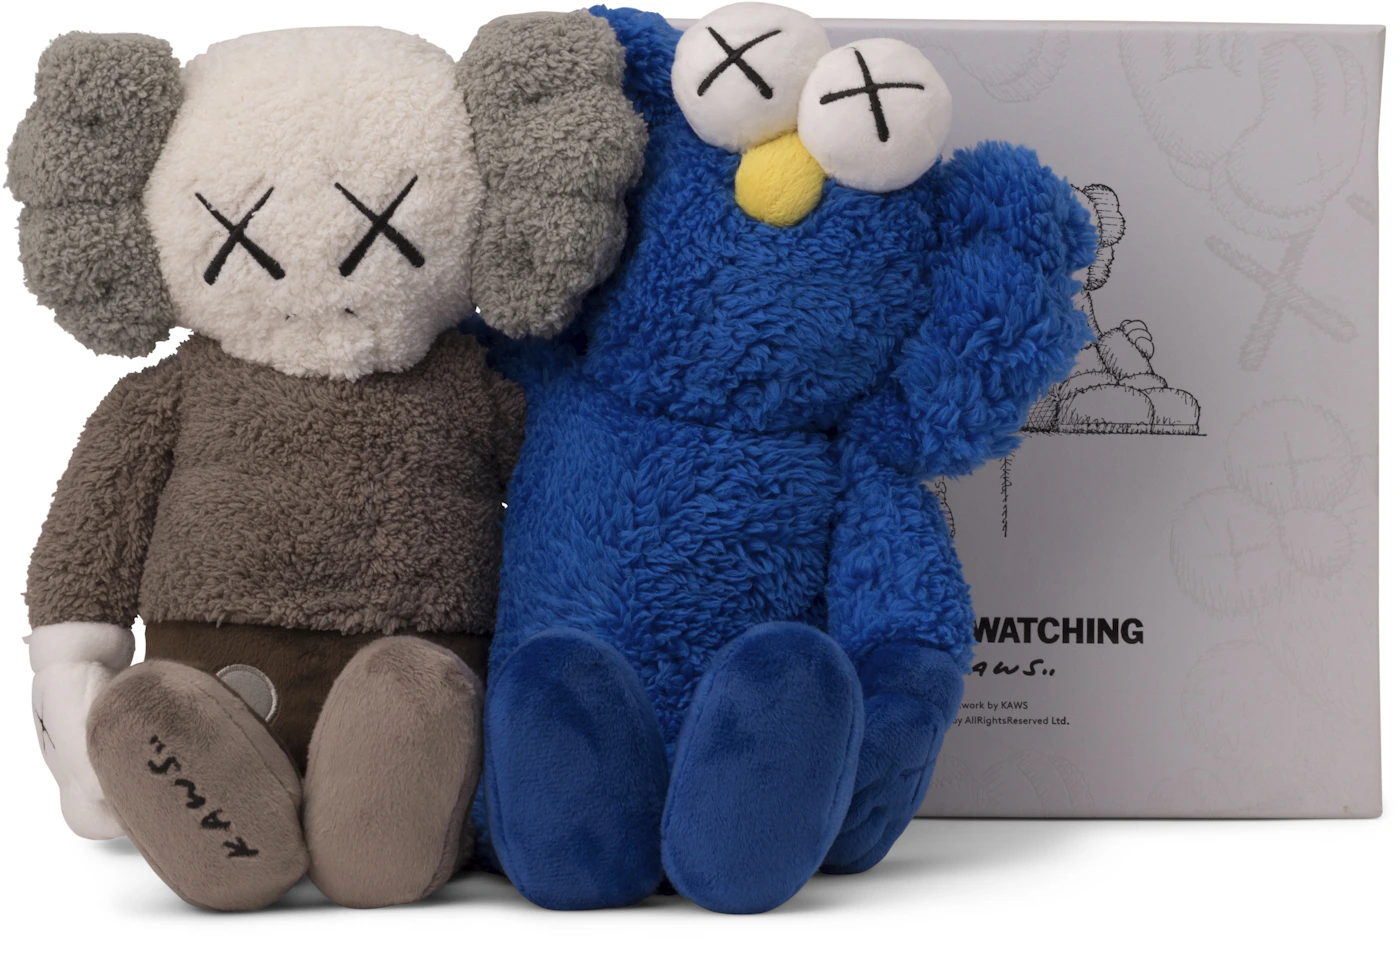 https://images.stockx.com/images/Kaws-Seeing-Watching-Plush-Doll-Grey-Blue.jpg?fit=fill&bg=FFFFFF&w=700&h=500&fm=webp&auto=compress&q=90&dpr=2&trim=color&updated_at=1614786493